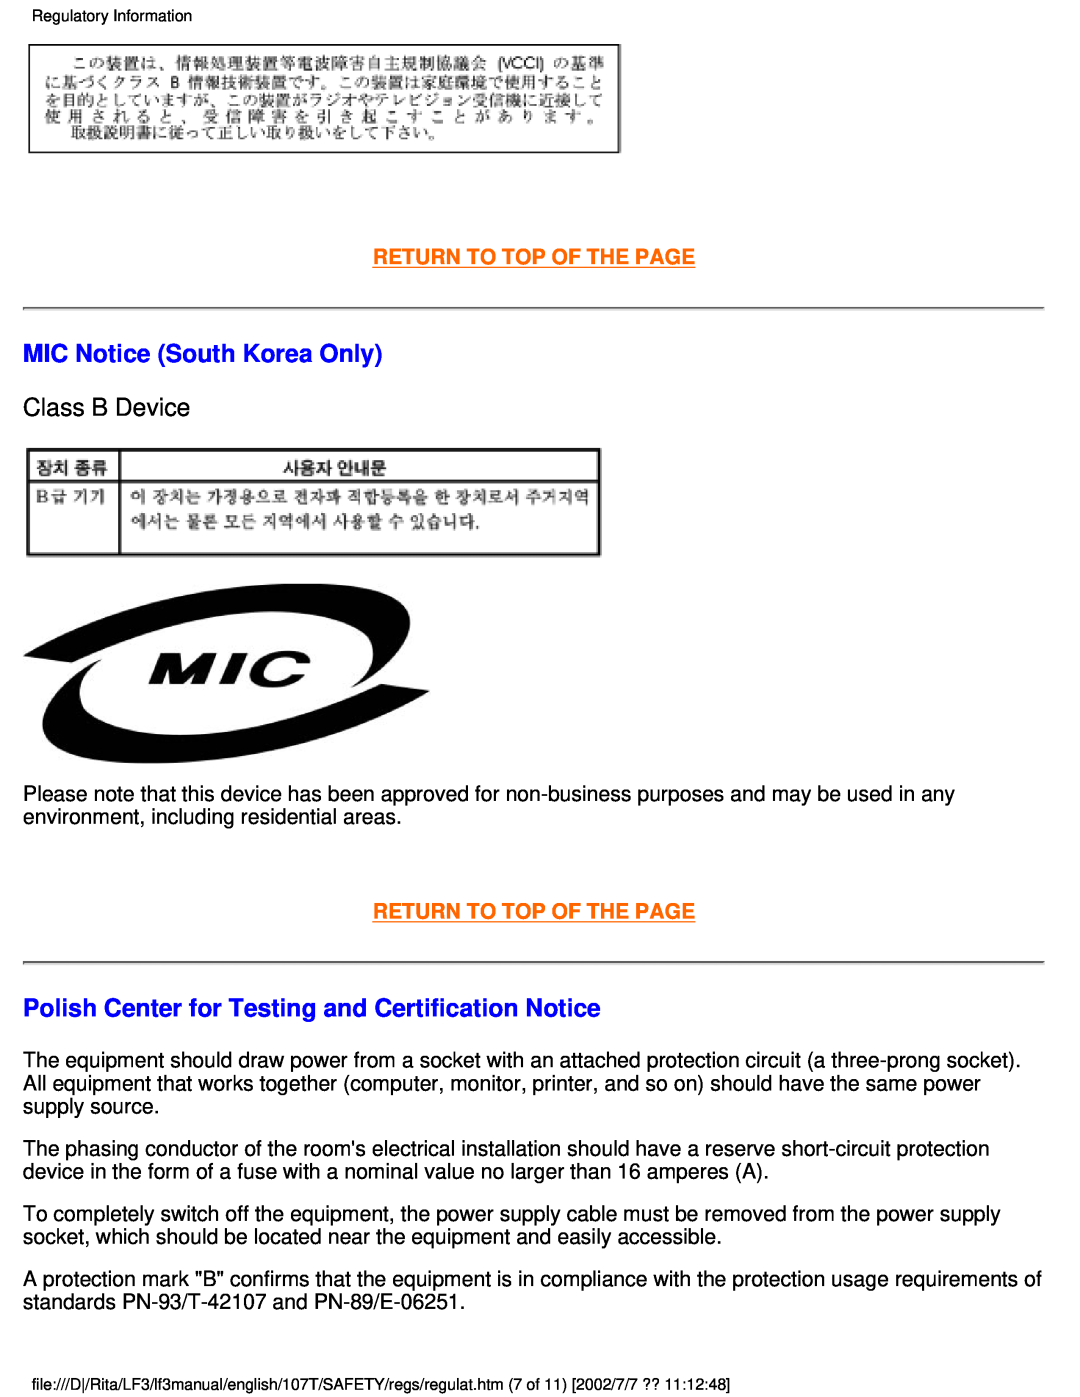 Philips 107T41 user manual MIC Notice South Korea Only, Polish Center for Testing and Certification Notice, Class B Device 